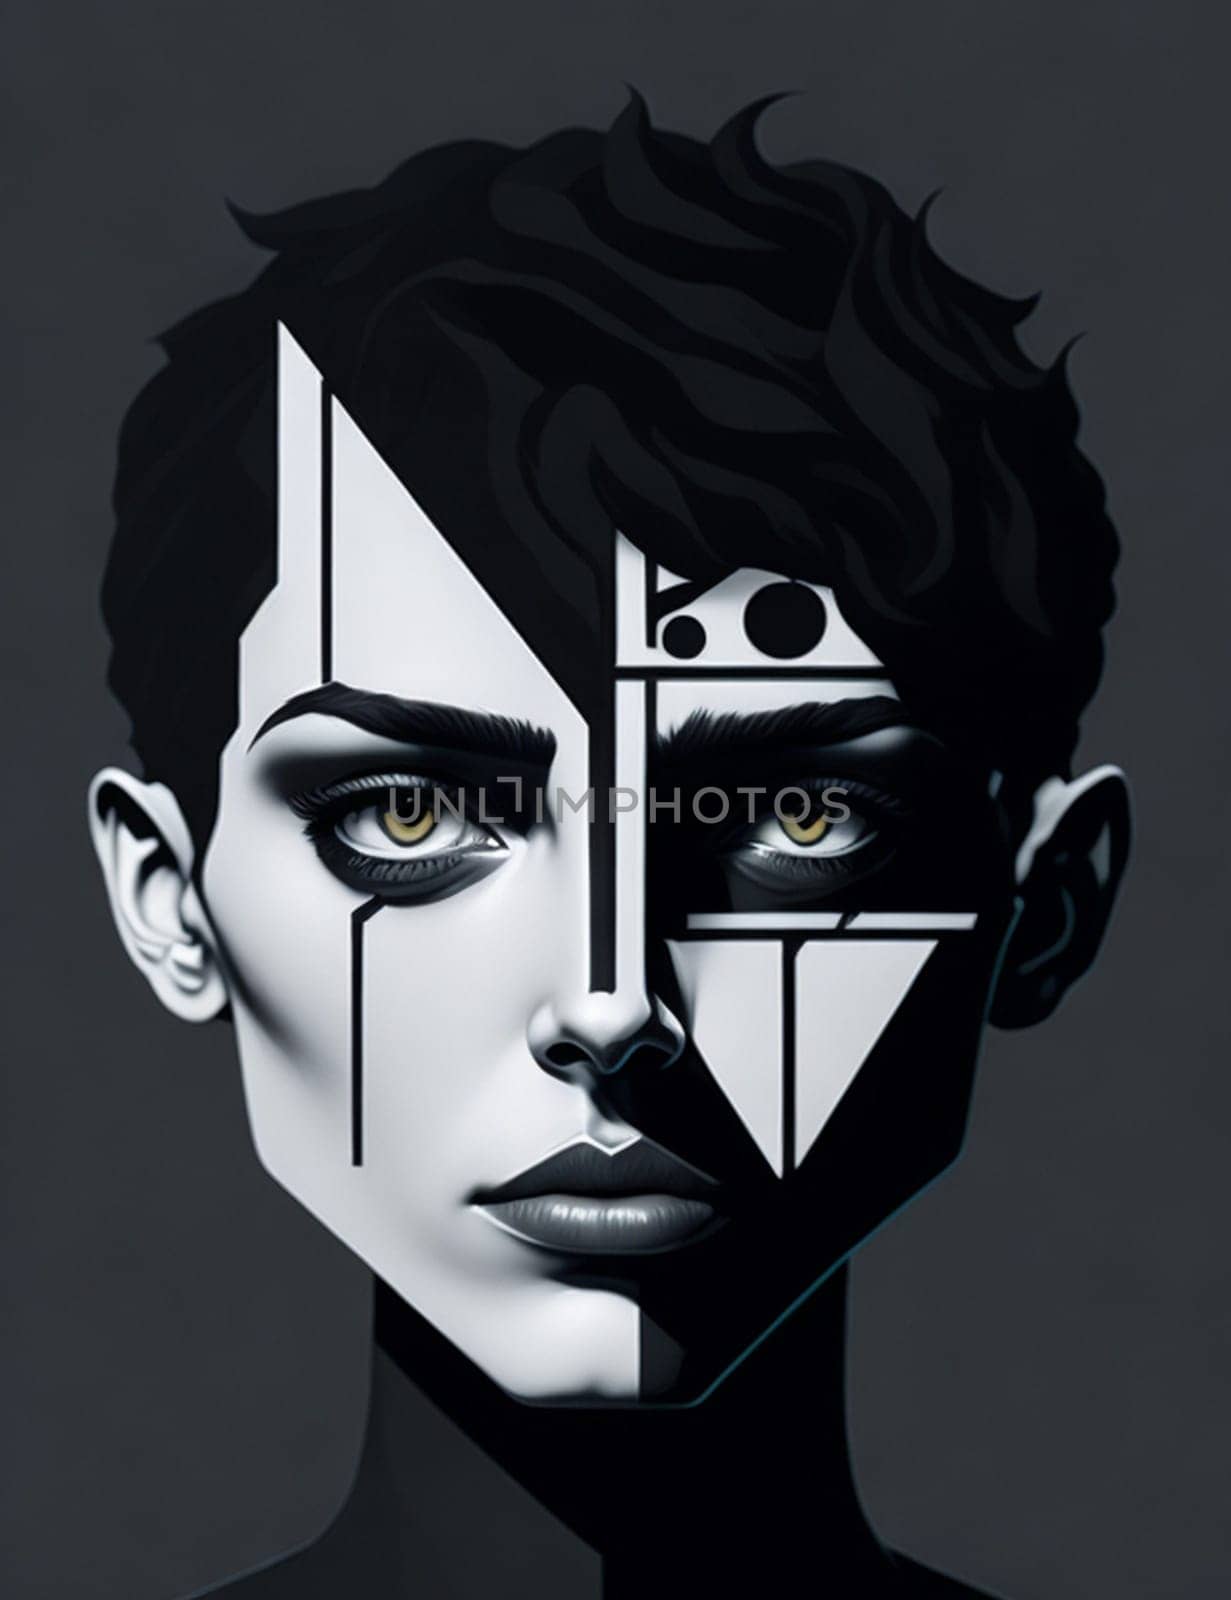 Portrait of a young woman in geometric Bauhaus style against a dark background. by Vailatese46